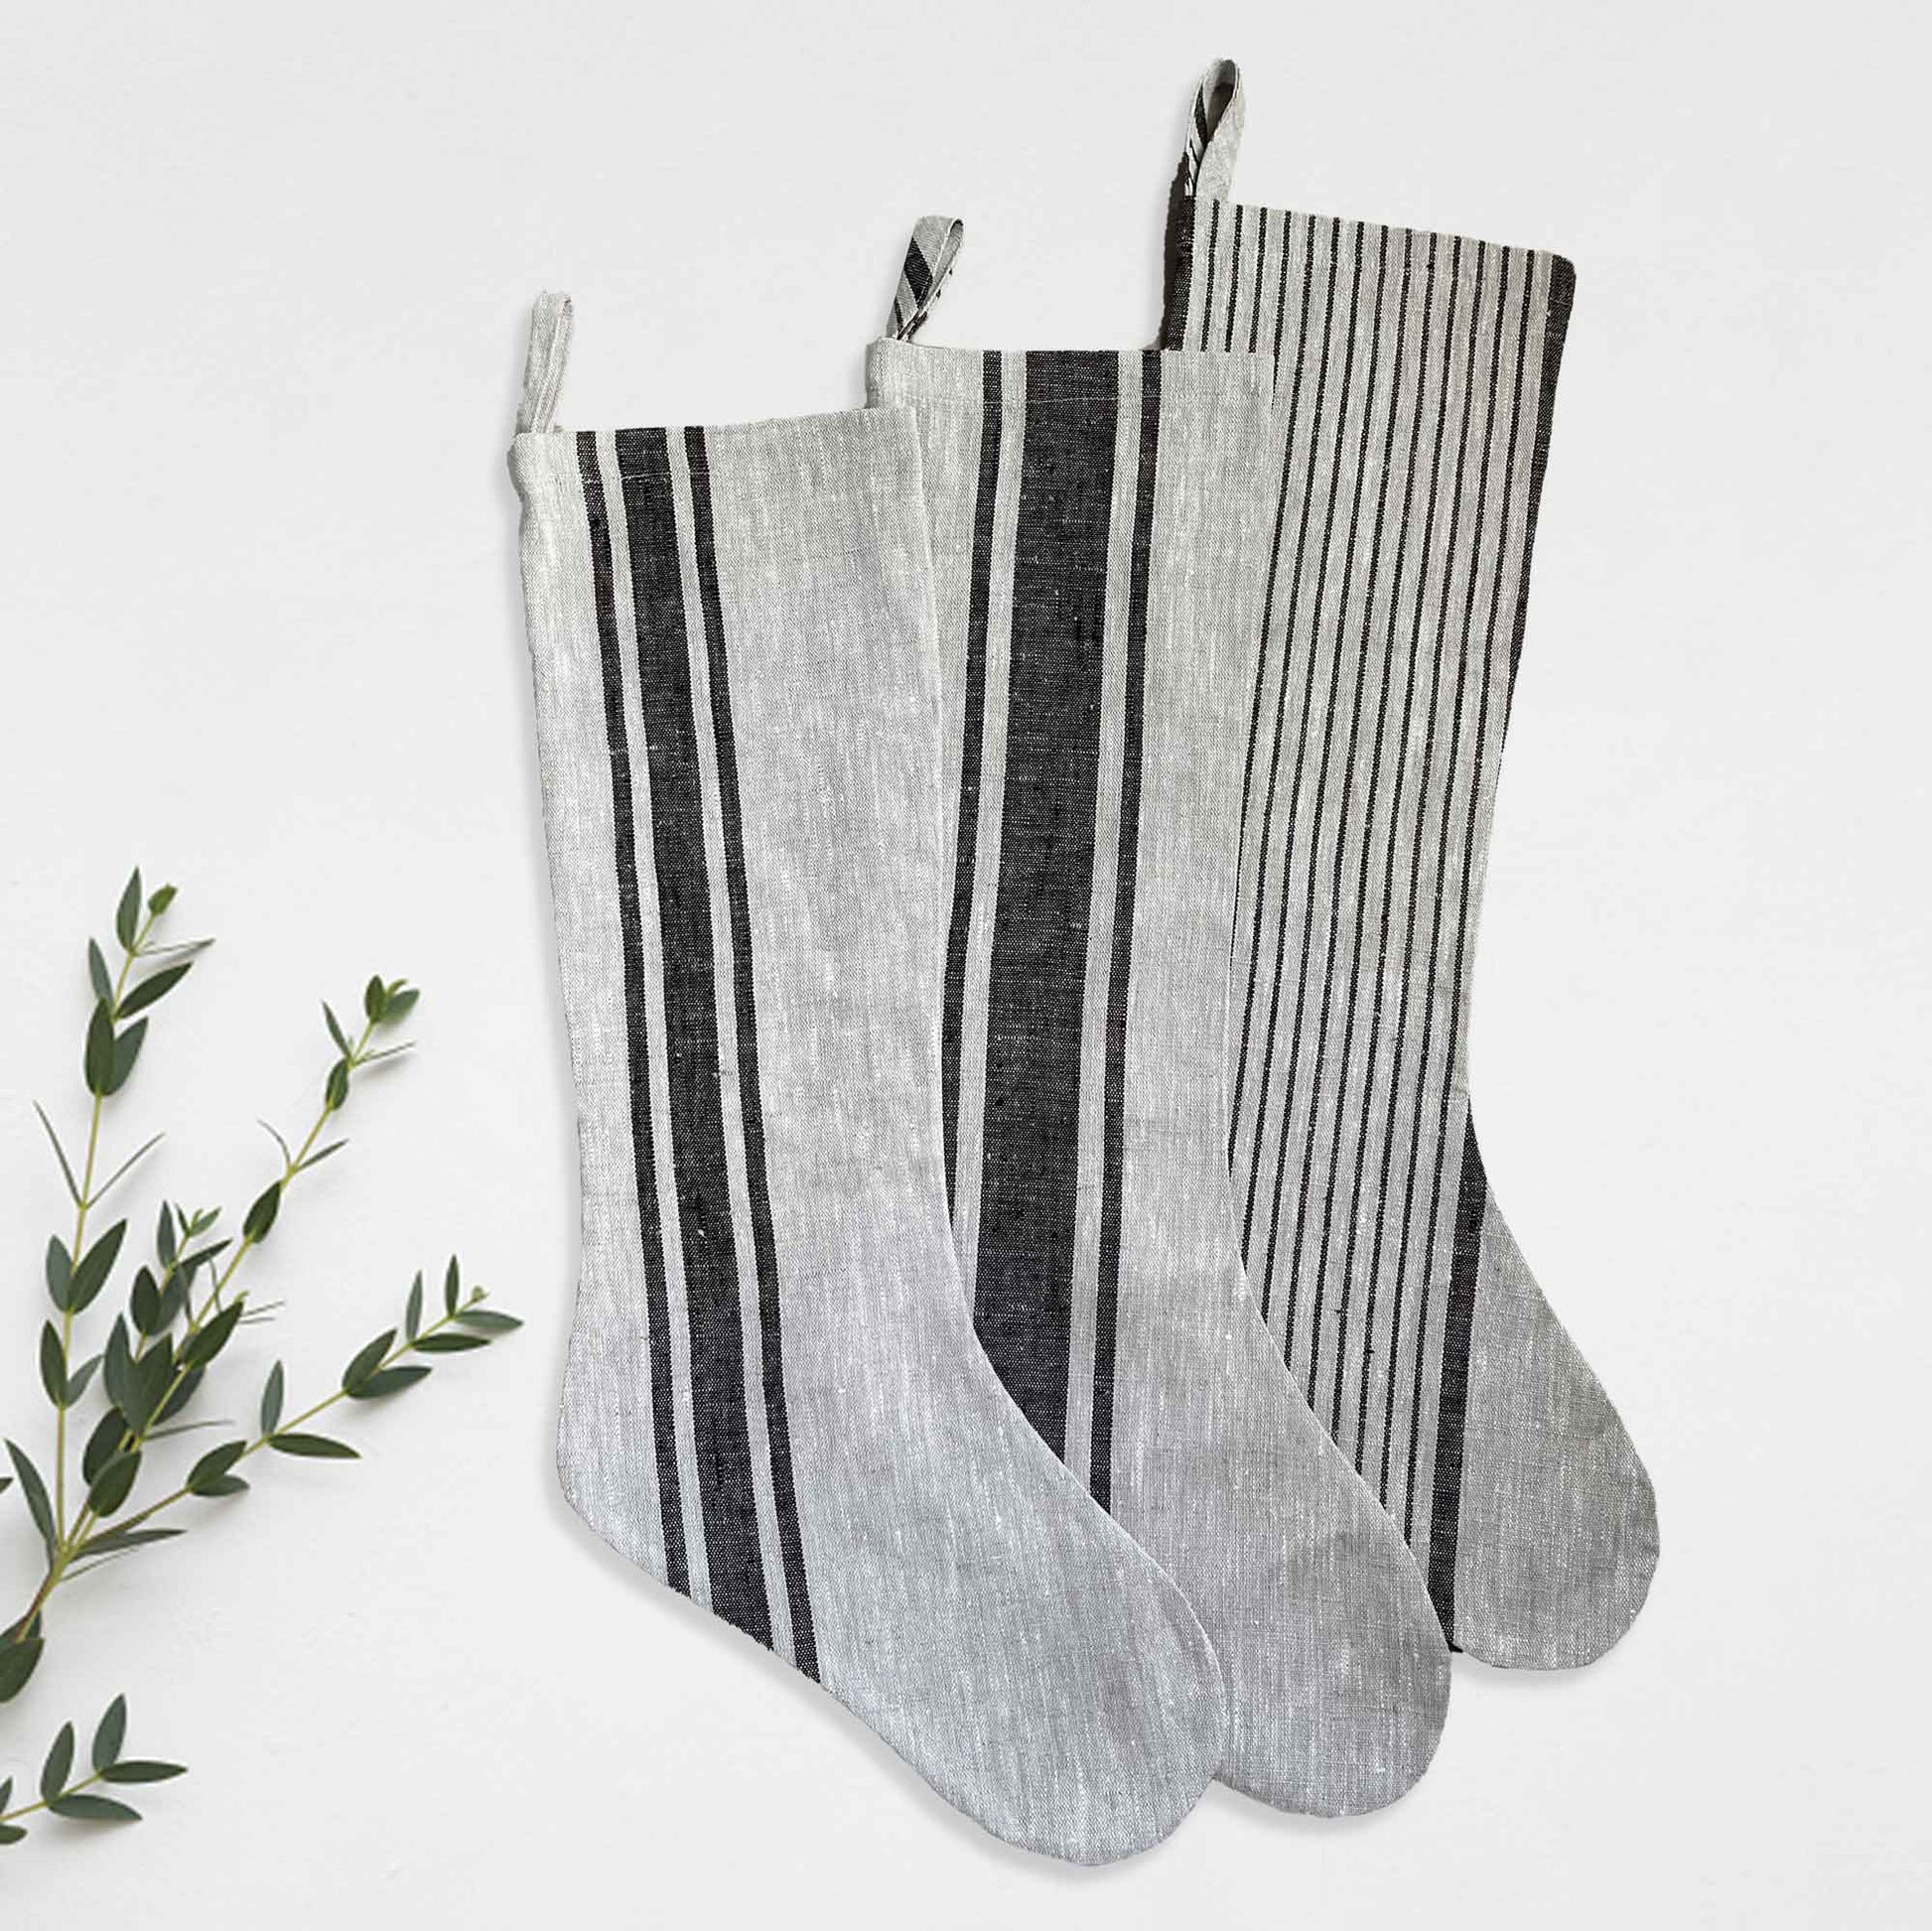 South Hous Scandinavian style Linen Holiday Stockings flat lay product shot